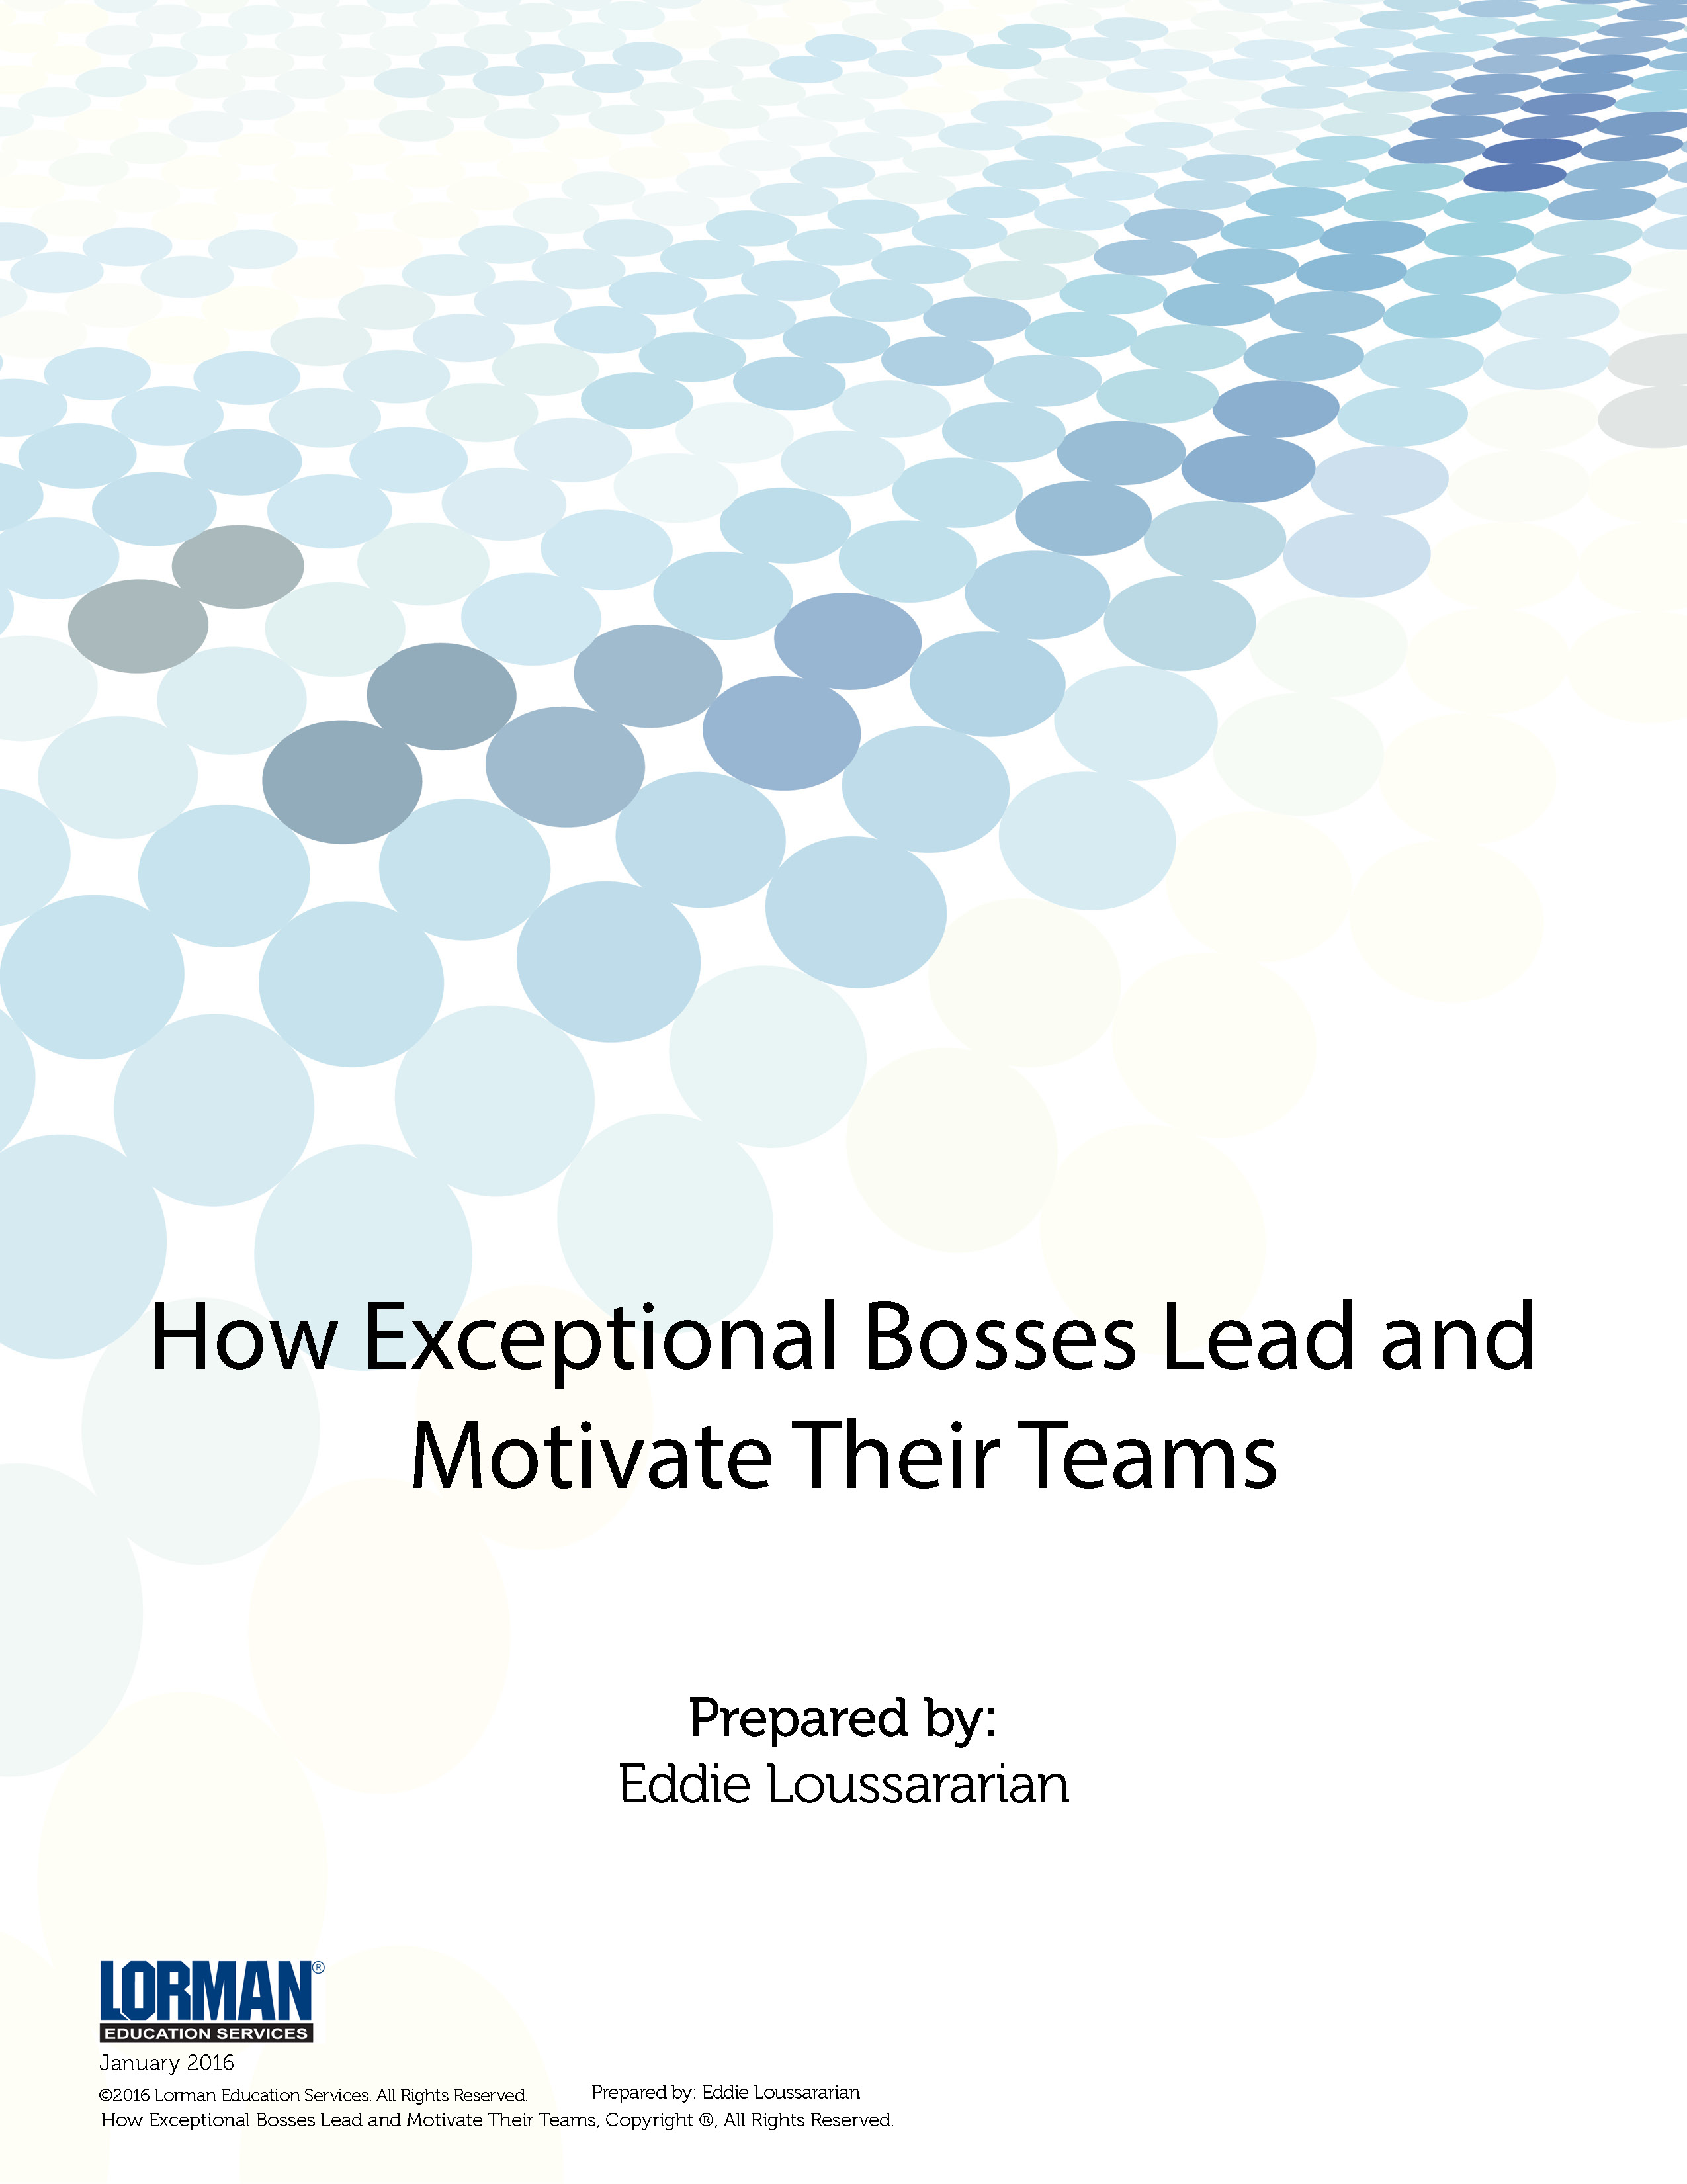 How Exceptional Bosses Lead and Motivate Their Teams